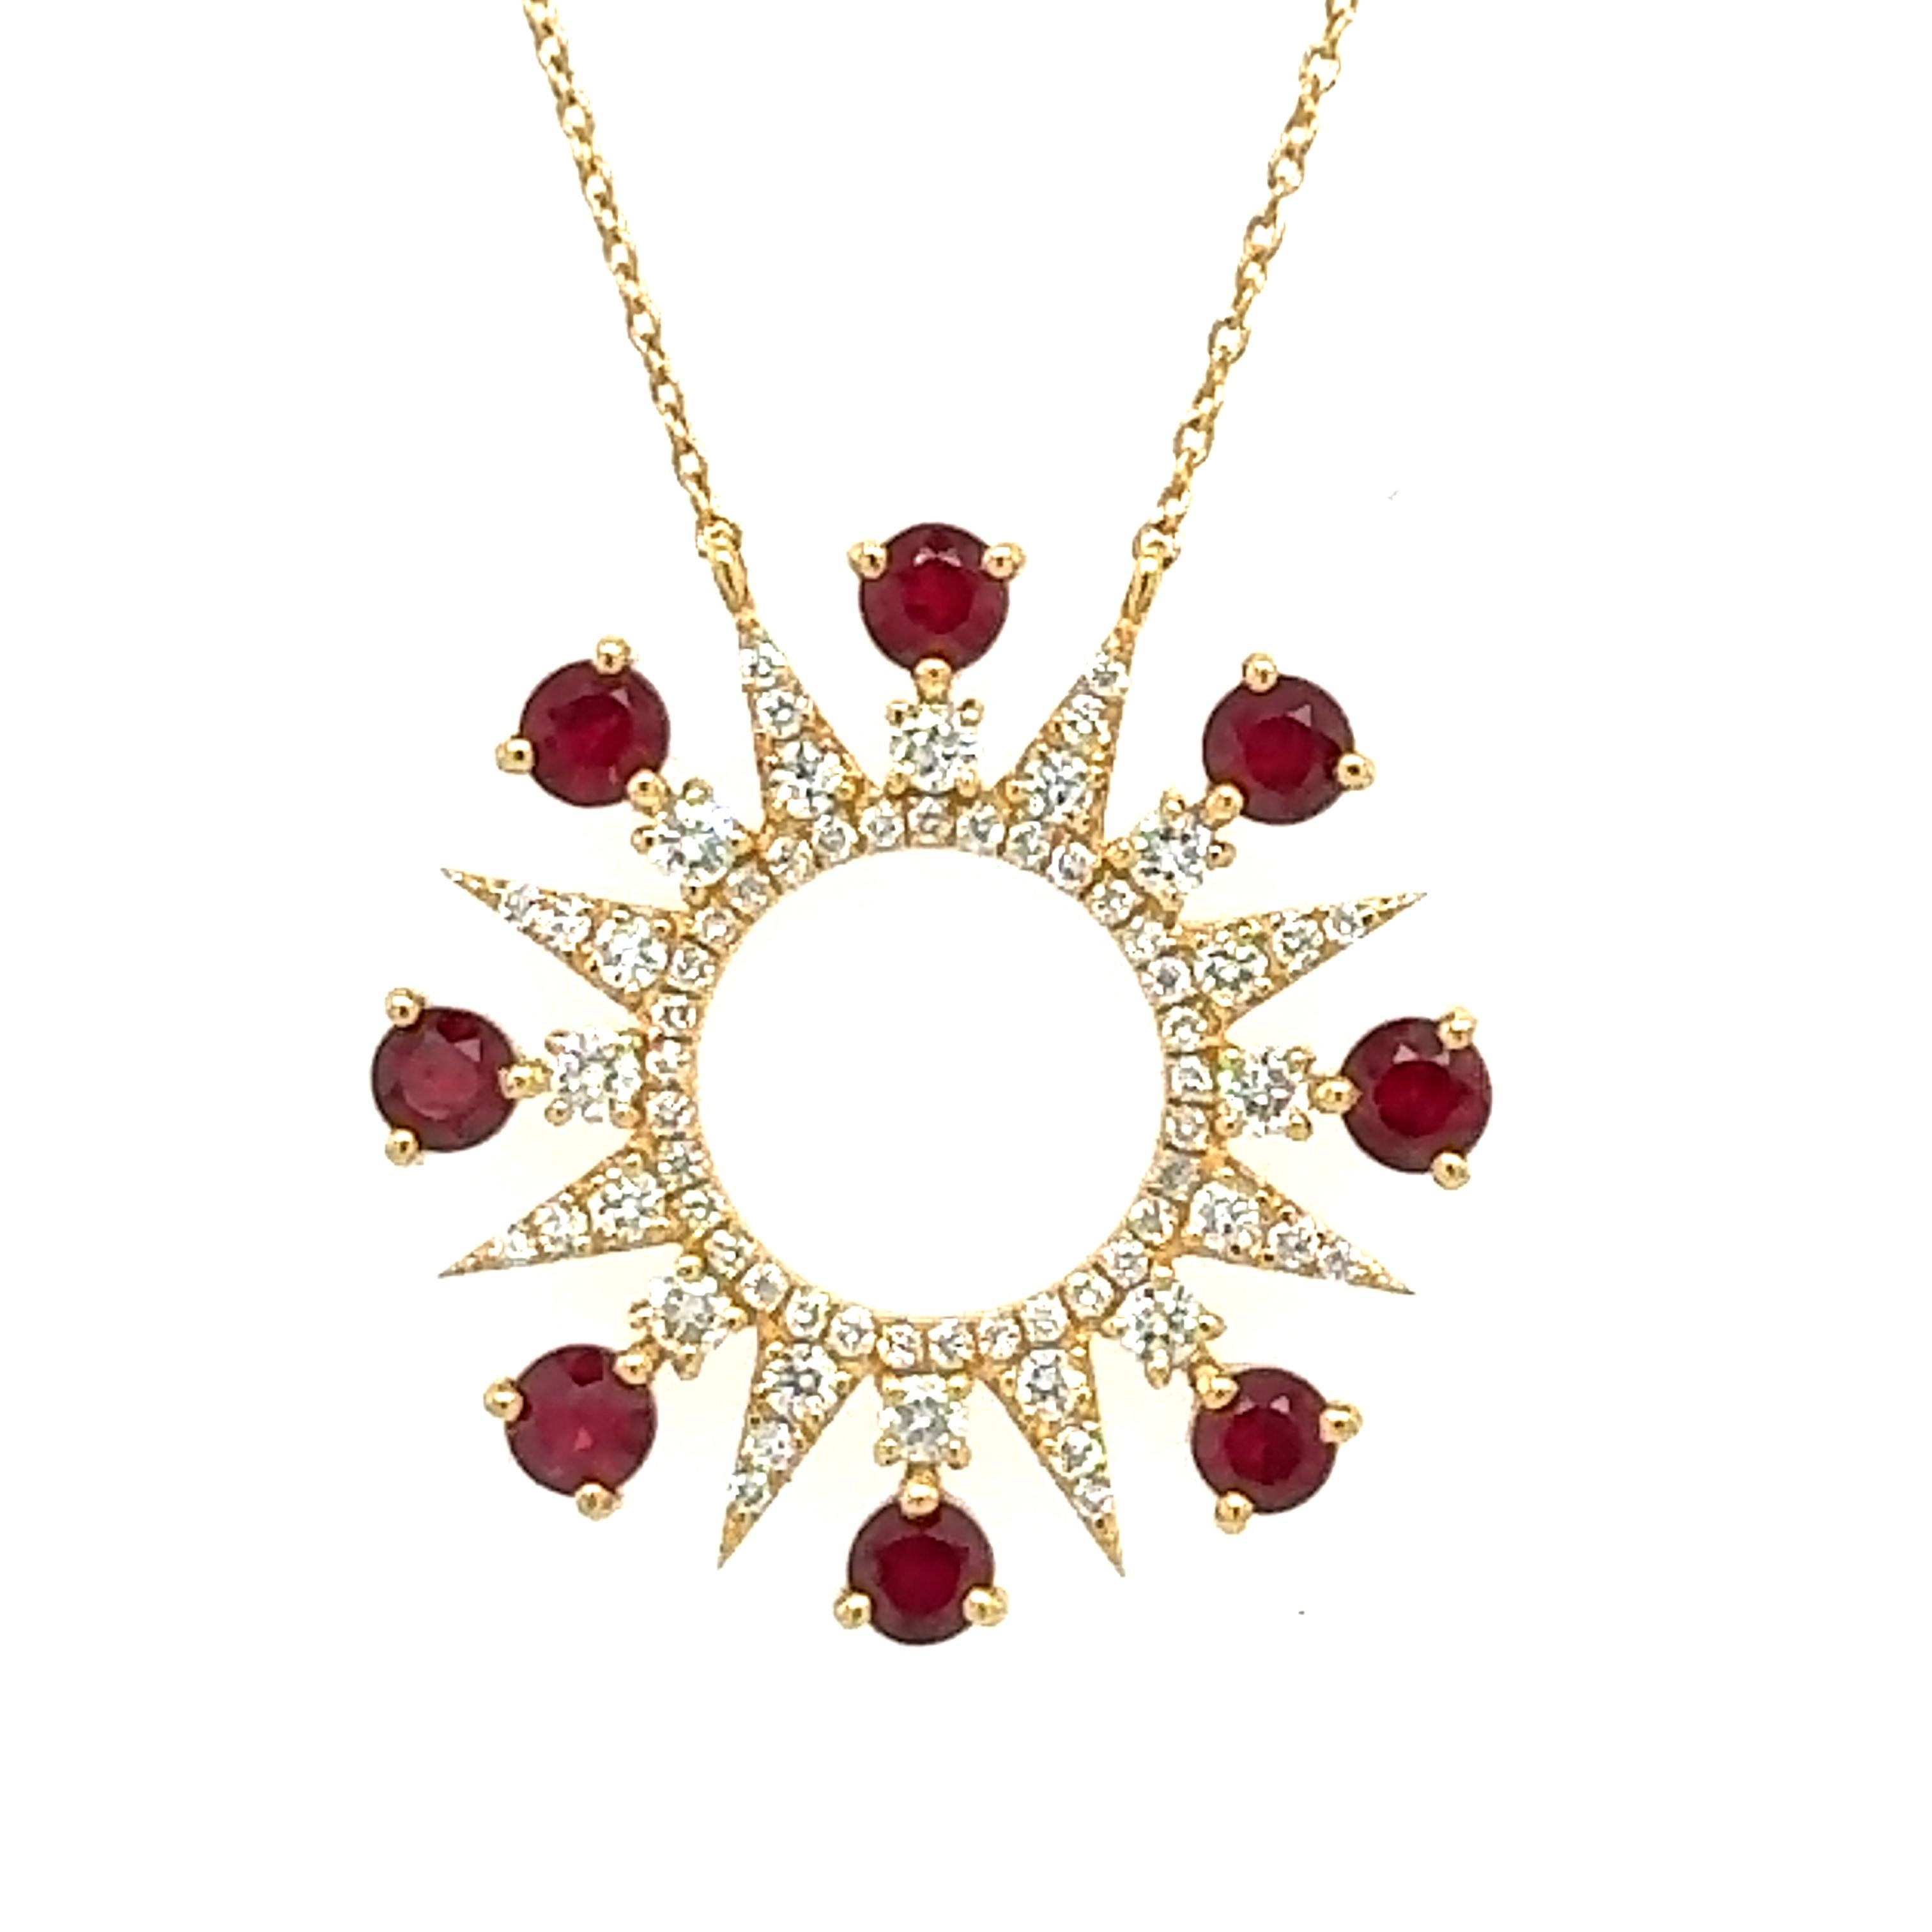 An 18-karat yellow gold necklace set with a natural 1.51-carat ruby and 0.74-carat diamonds. This lovely, sophisticated necklace with an adjustable catch. The necklace is 18 inches long, but you may modify the size to make it 16, 17, or 18 inches